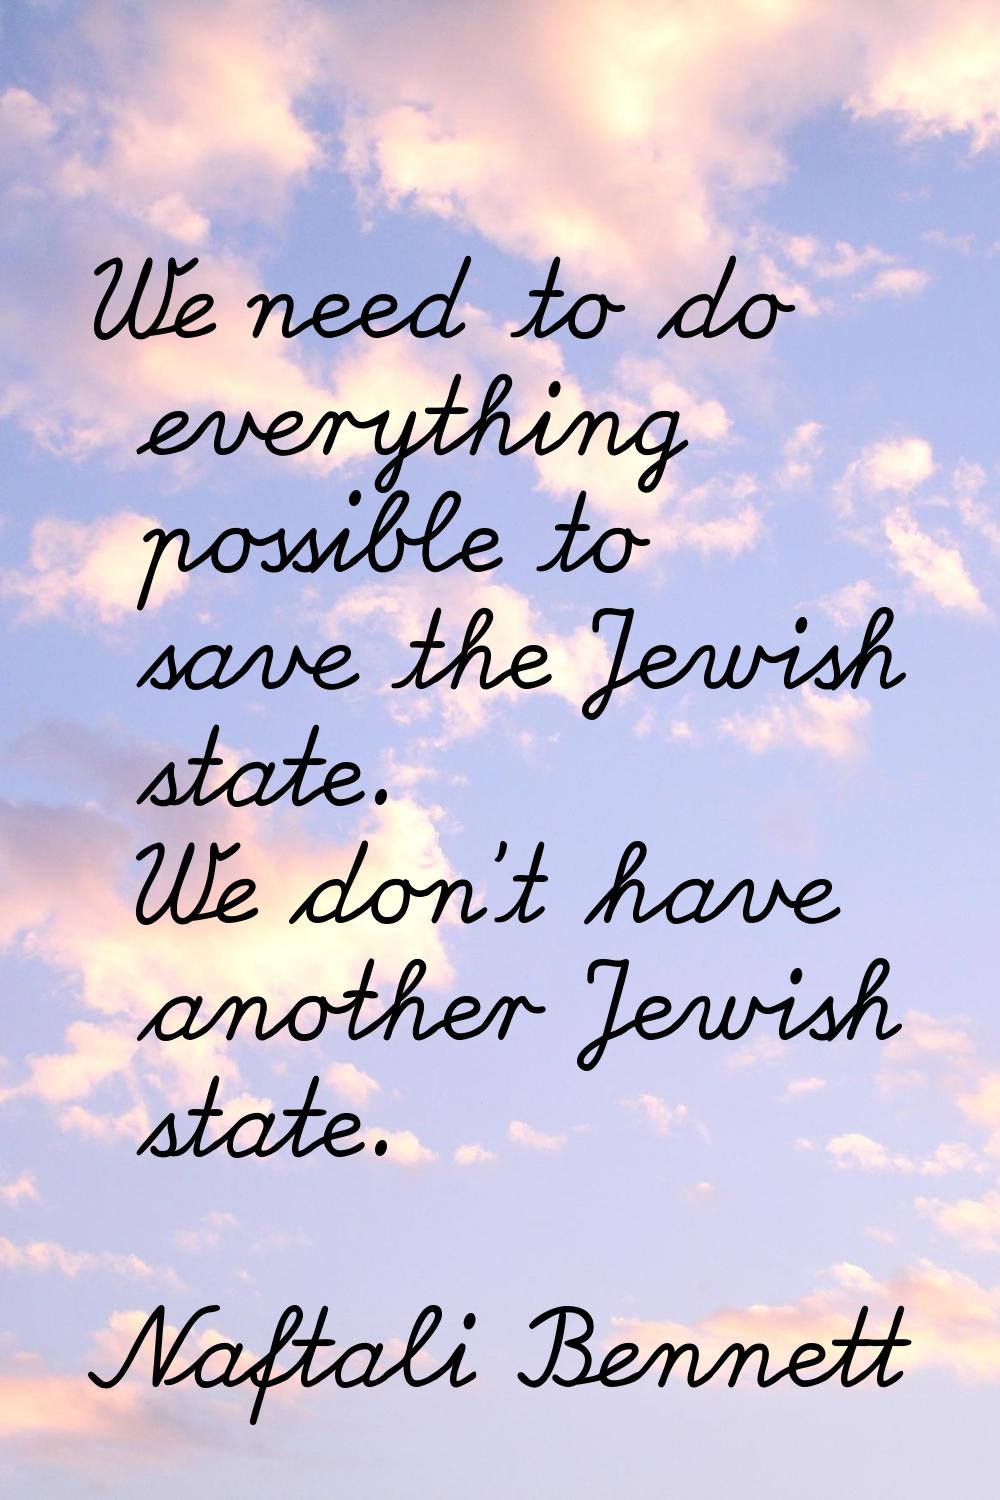 We need to do everything possible to save the Jewish state. We don't have another Jewish state.